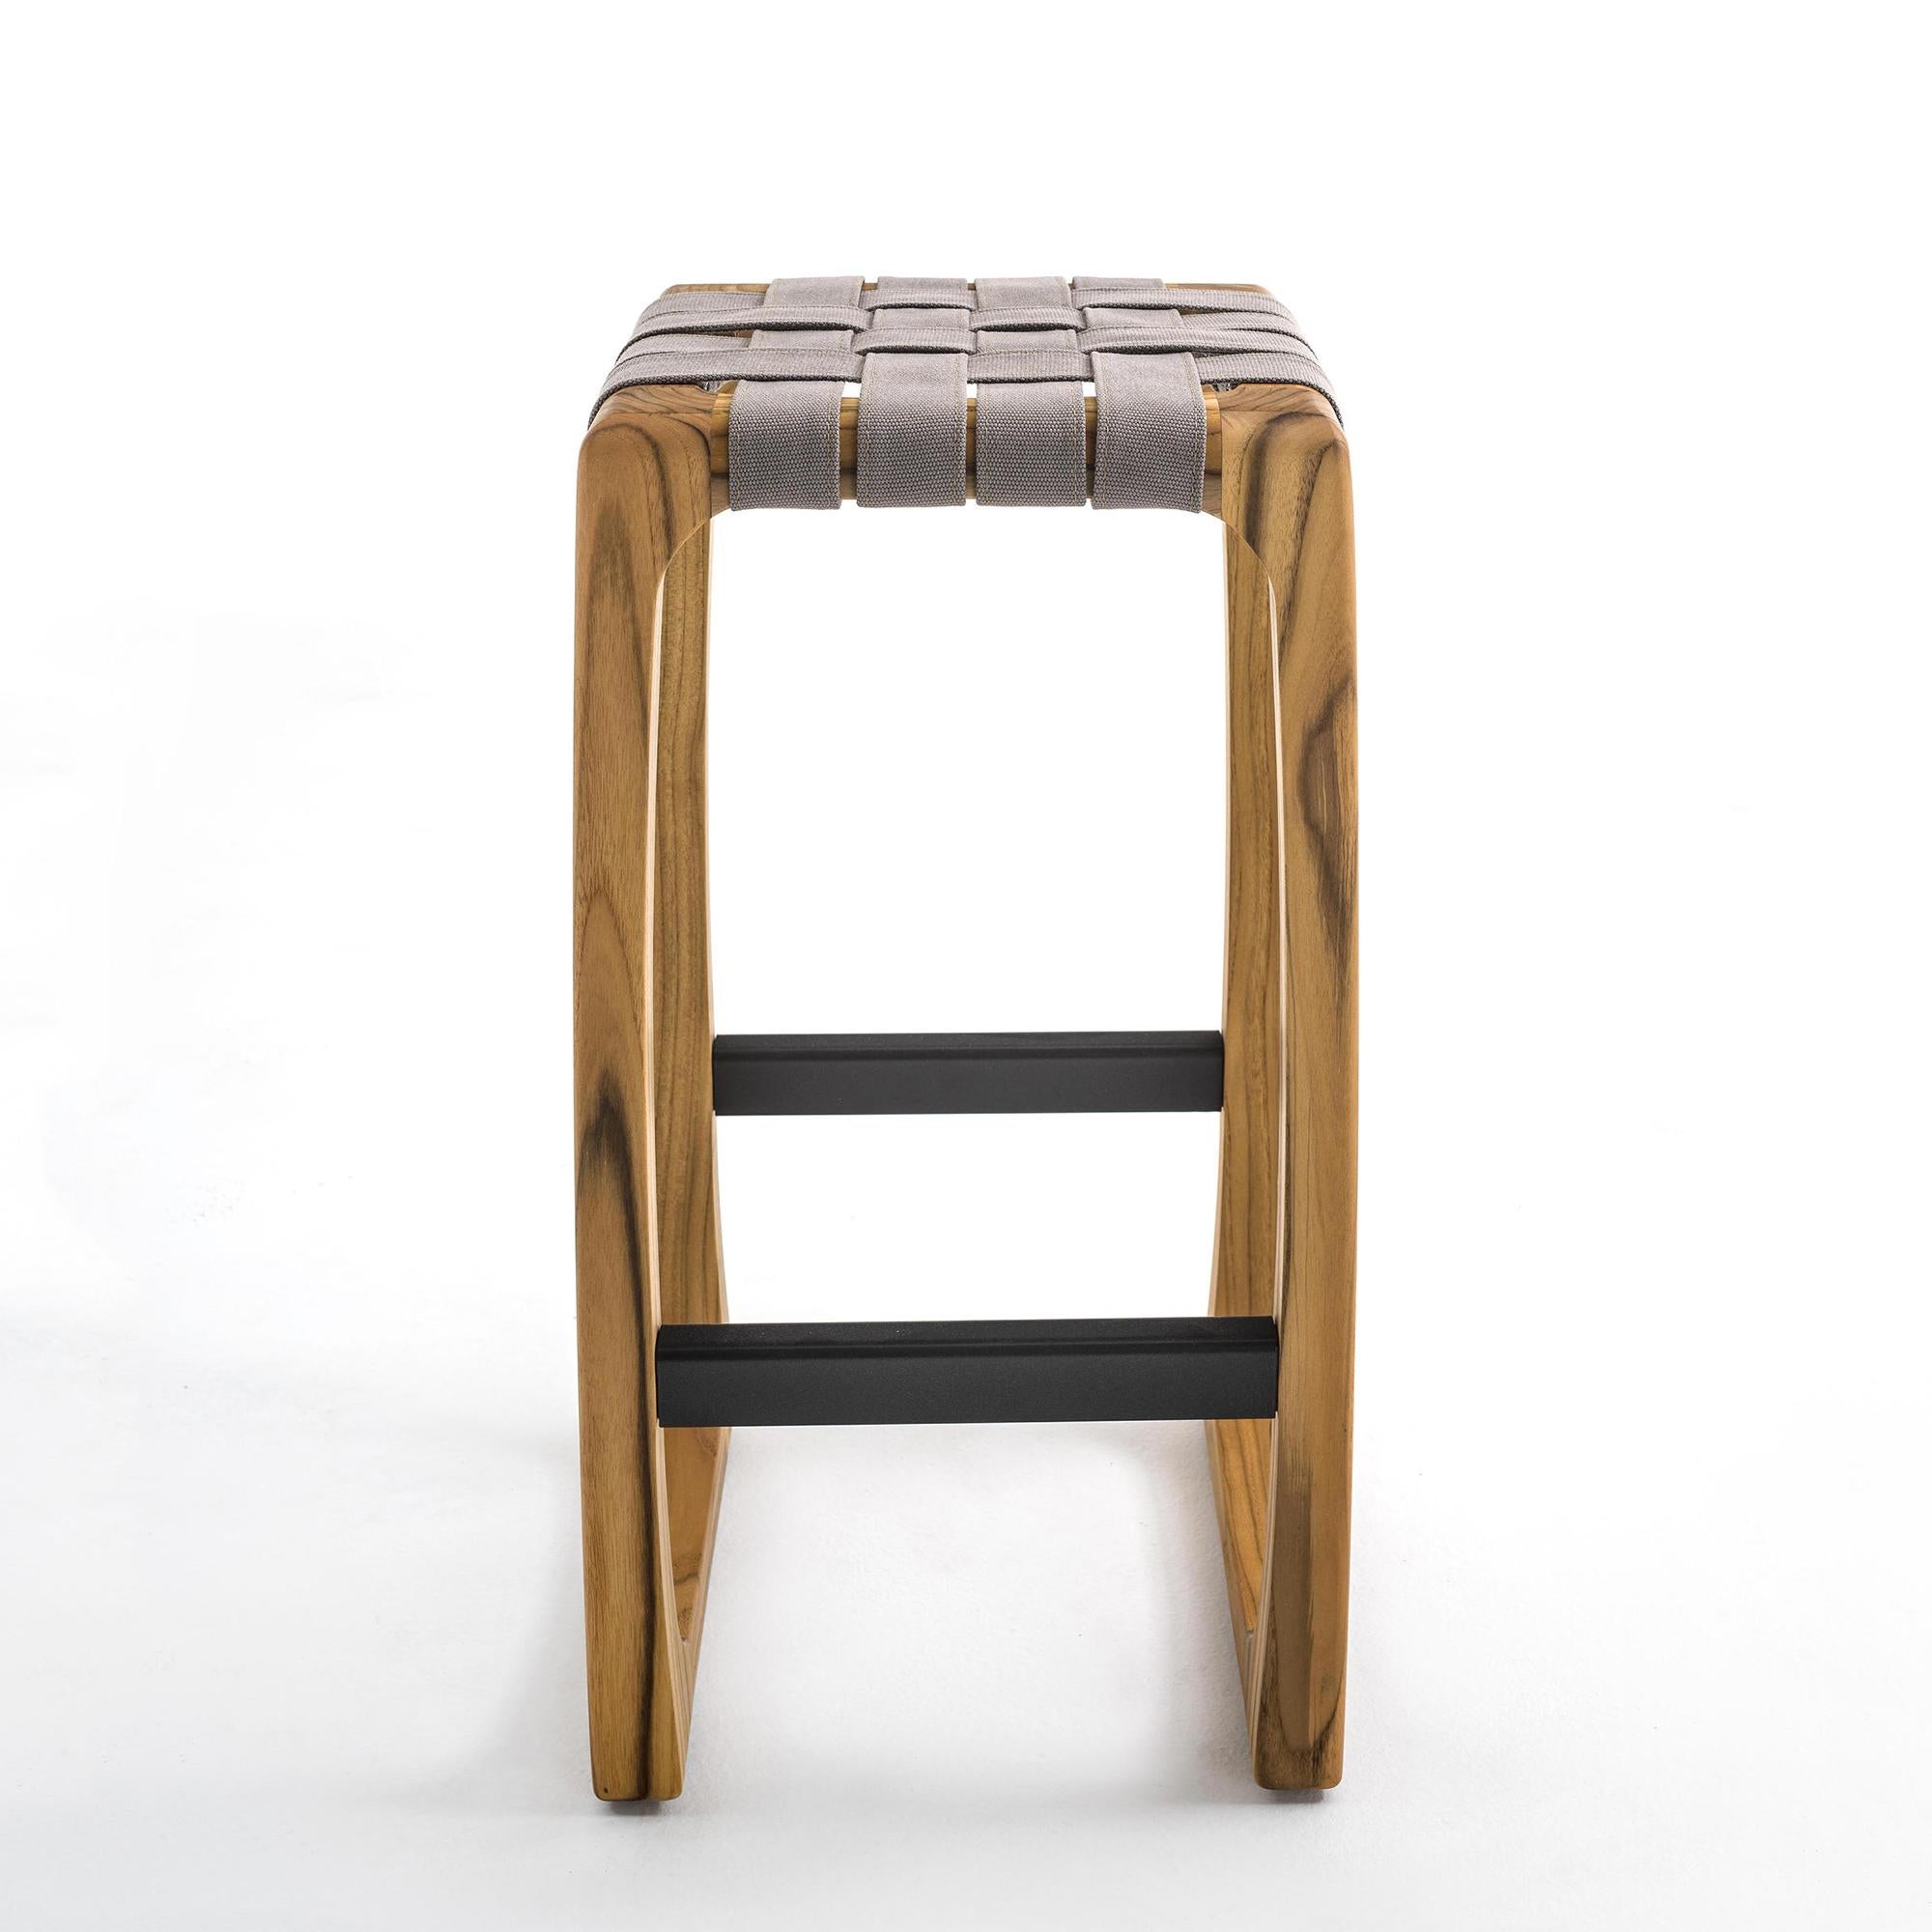 Bar stool webbing outdoor with structure in solid
natural teak wood. Covered with special outdoor
fabric in light grey finish. Wood treated with natural 
pine extract wax. Footrests in lacquered iron.
Also available in L39,5xD39,5xH74cm.